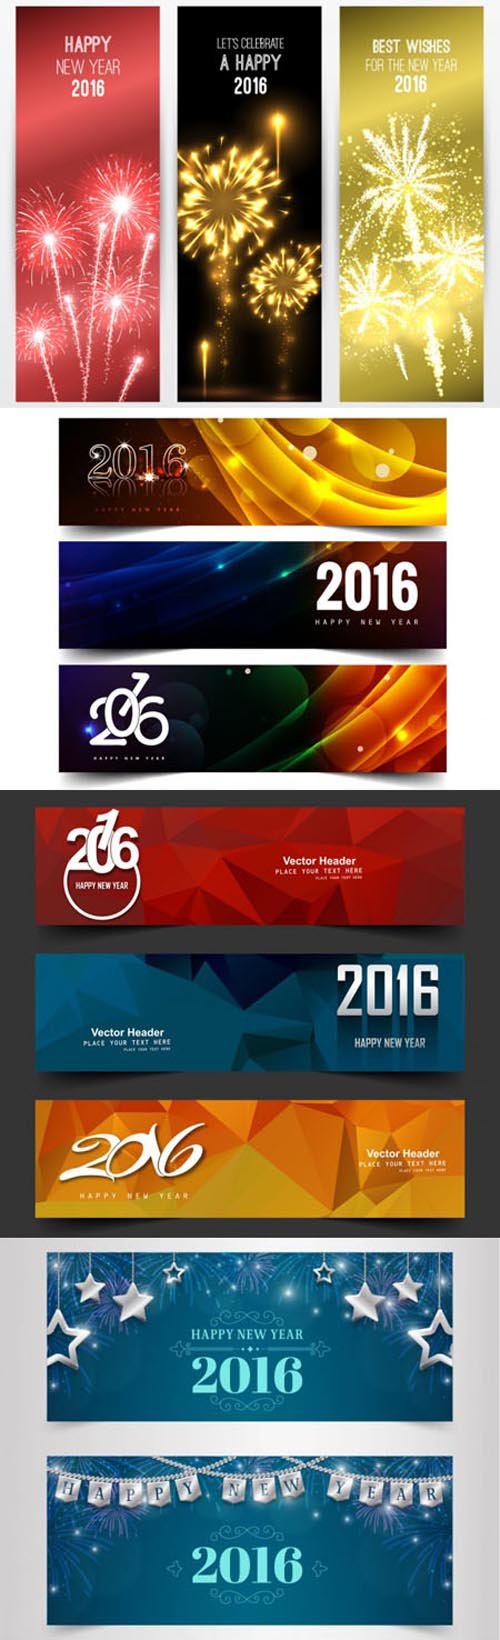 Happy New Year 2016 Banners in Vector [Vol.2]